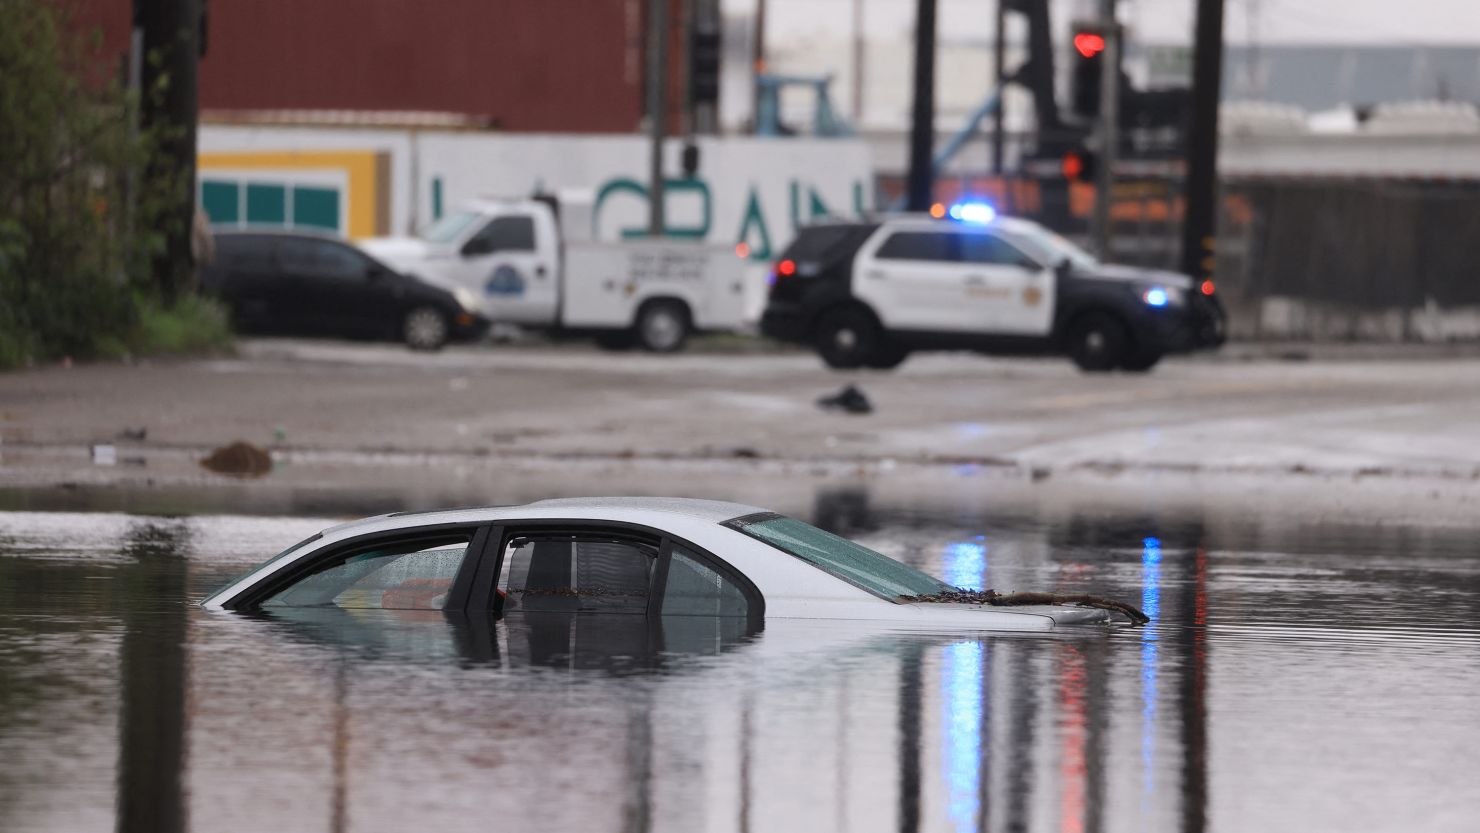 A car sits partially submerged on a flooded road during a rain storm in Long Beach, California, on Thursday.